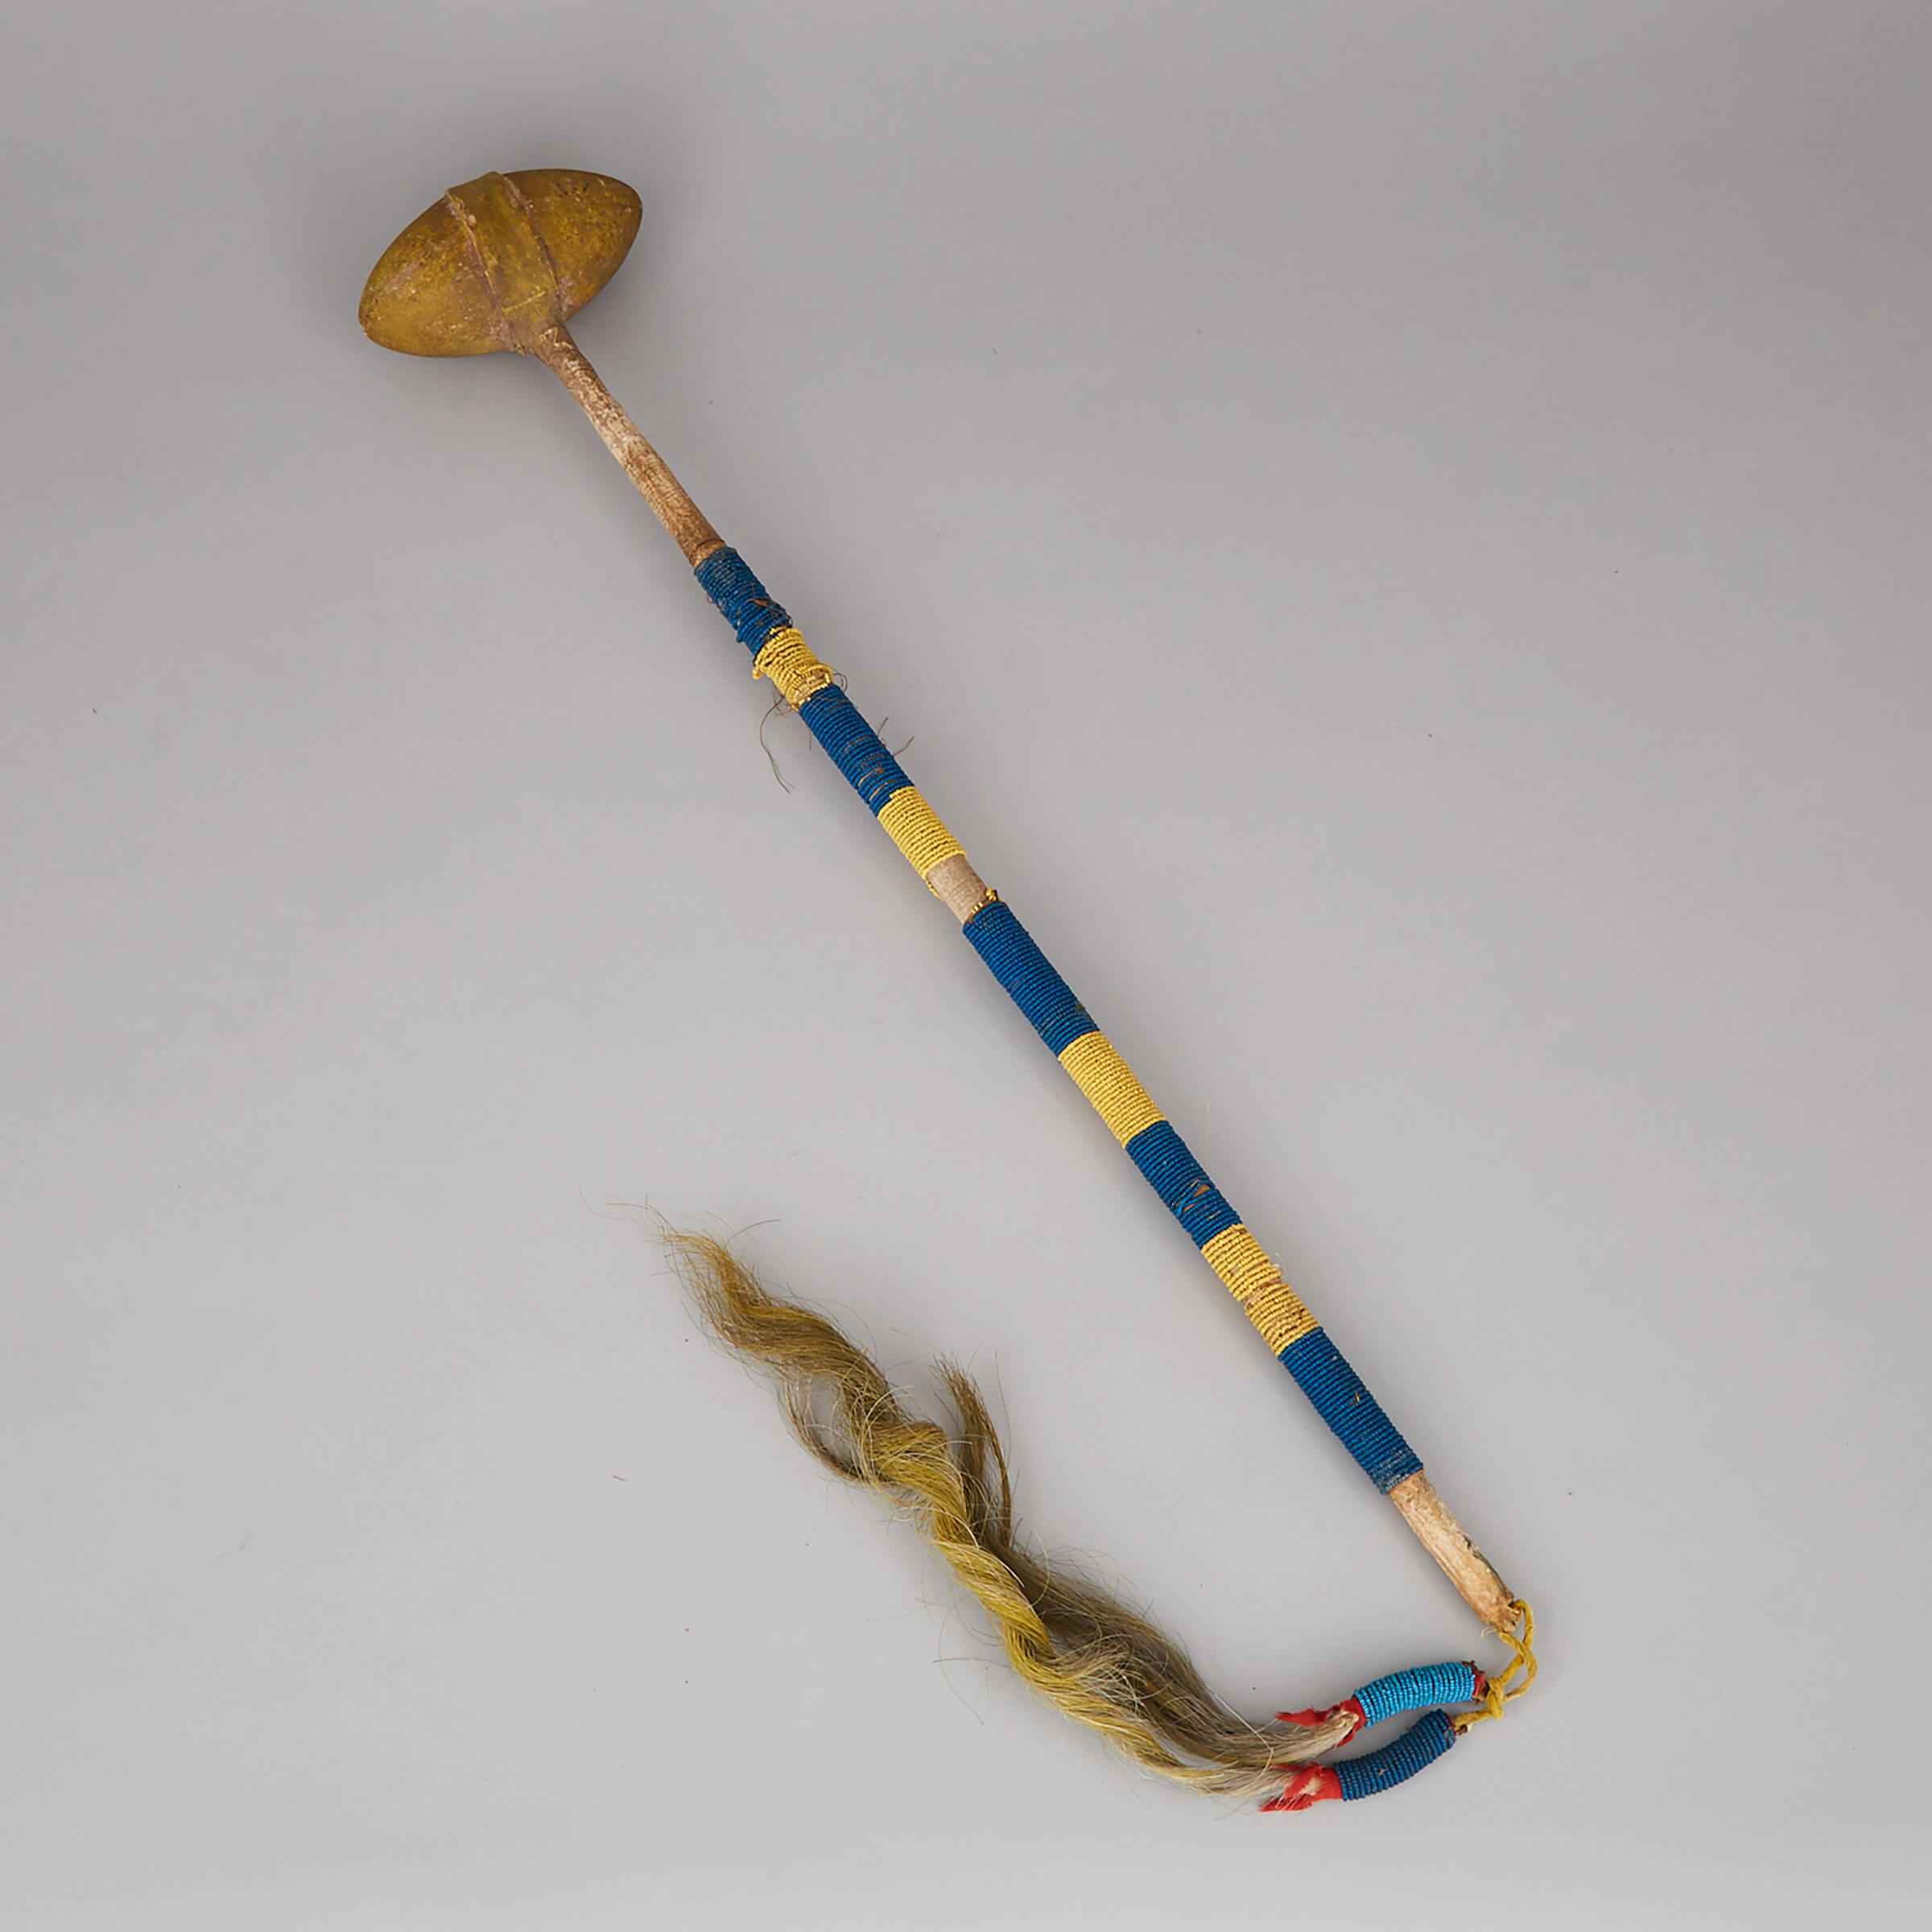 Plains Indian Ceremonial War Club, 19th/early 20th century